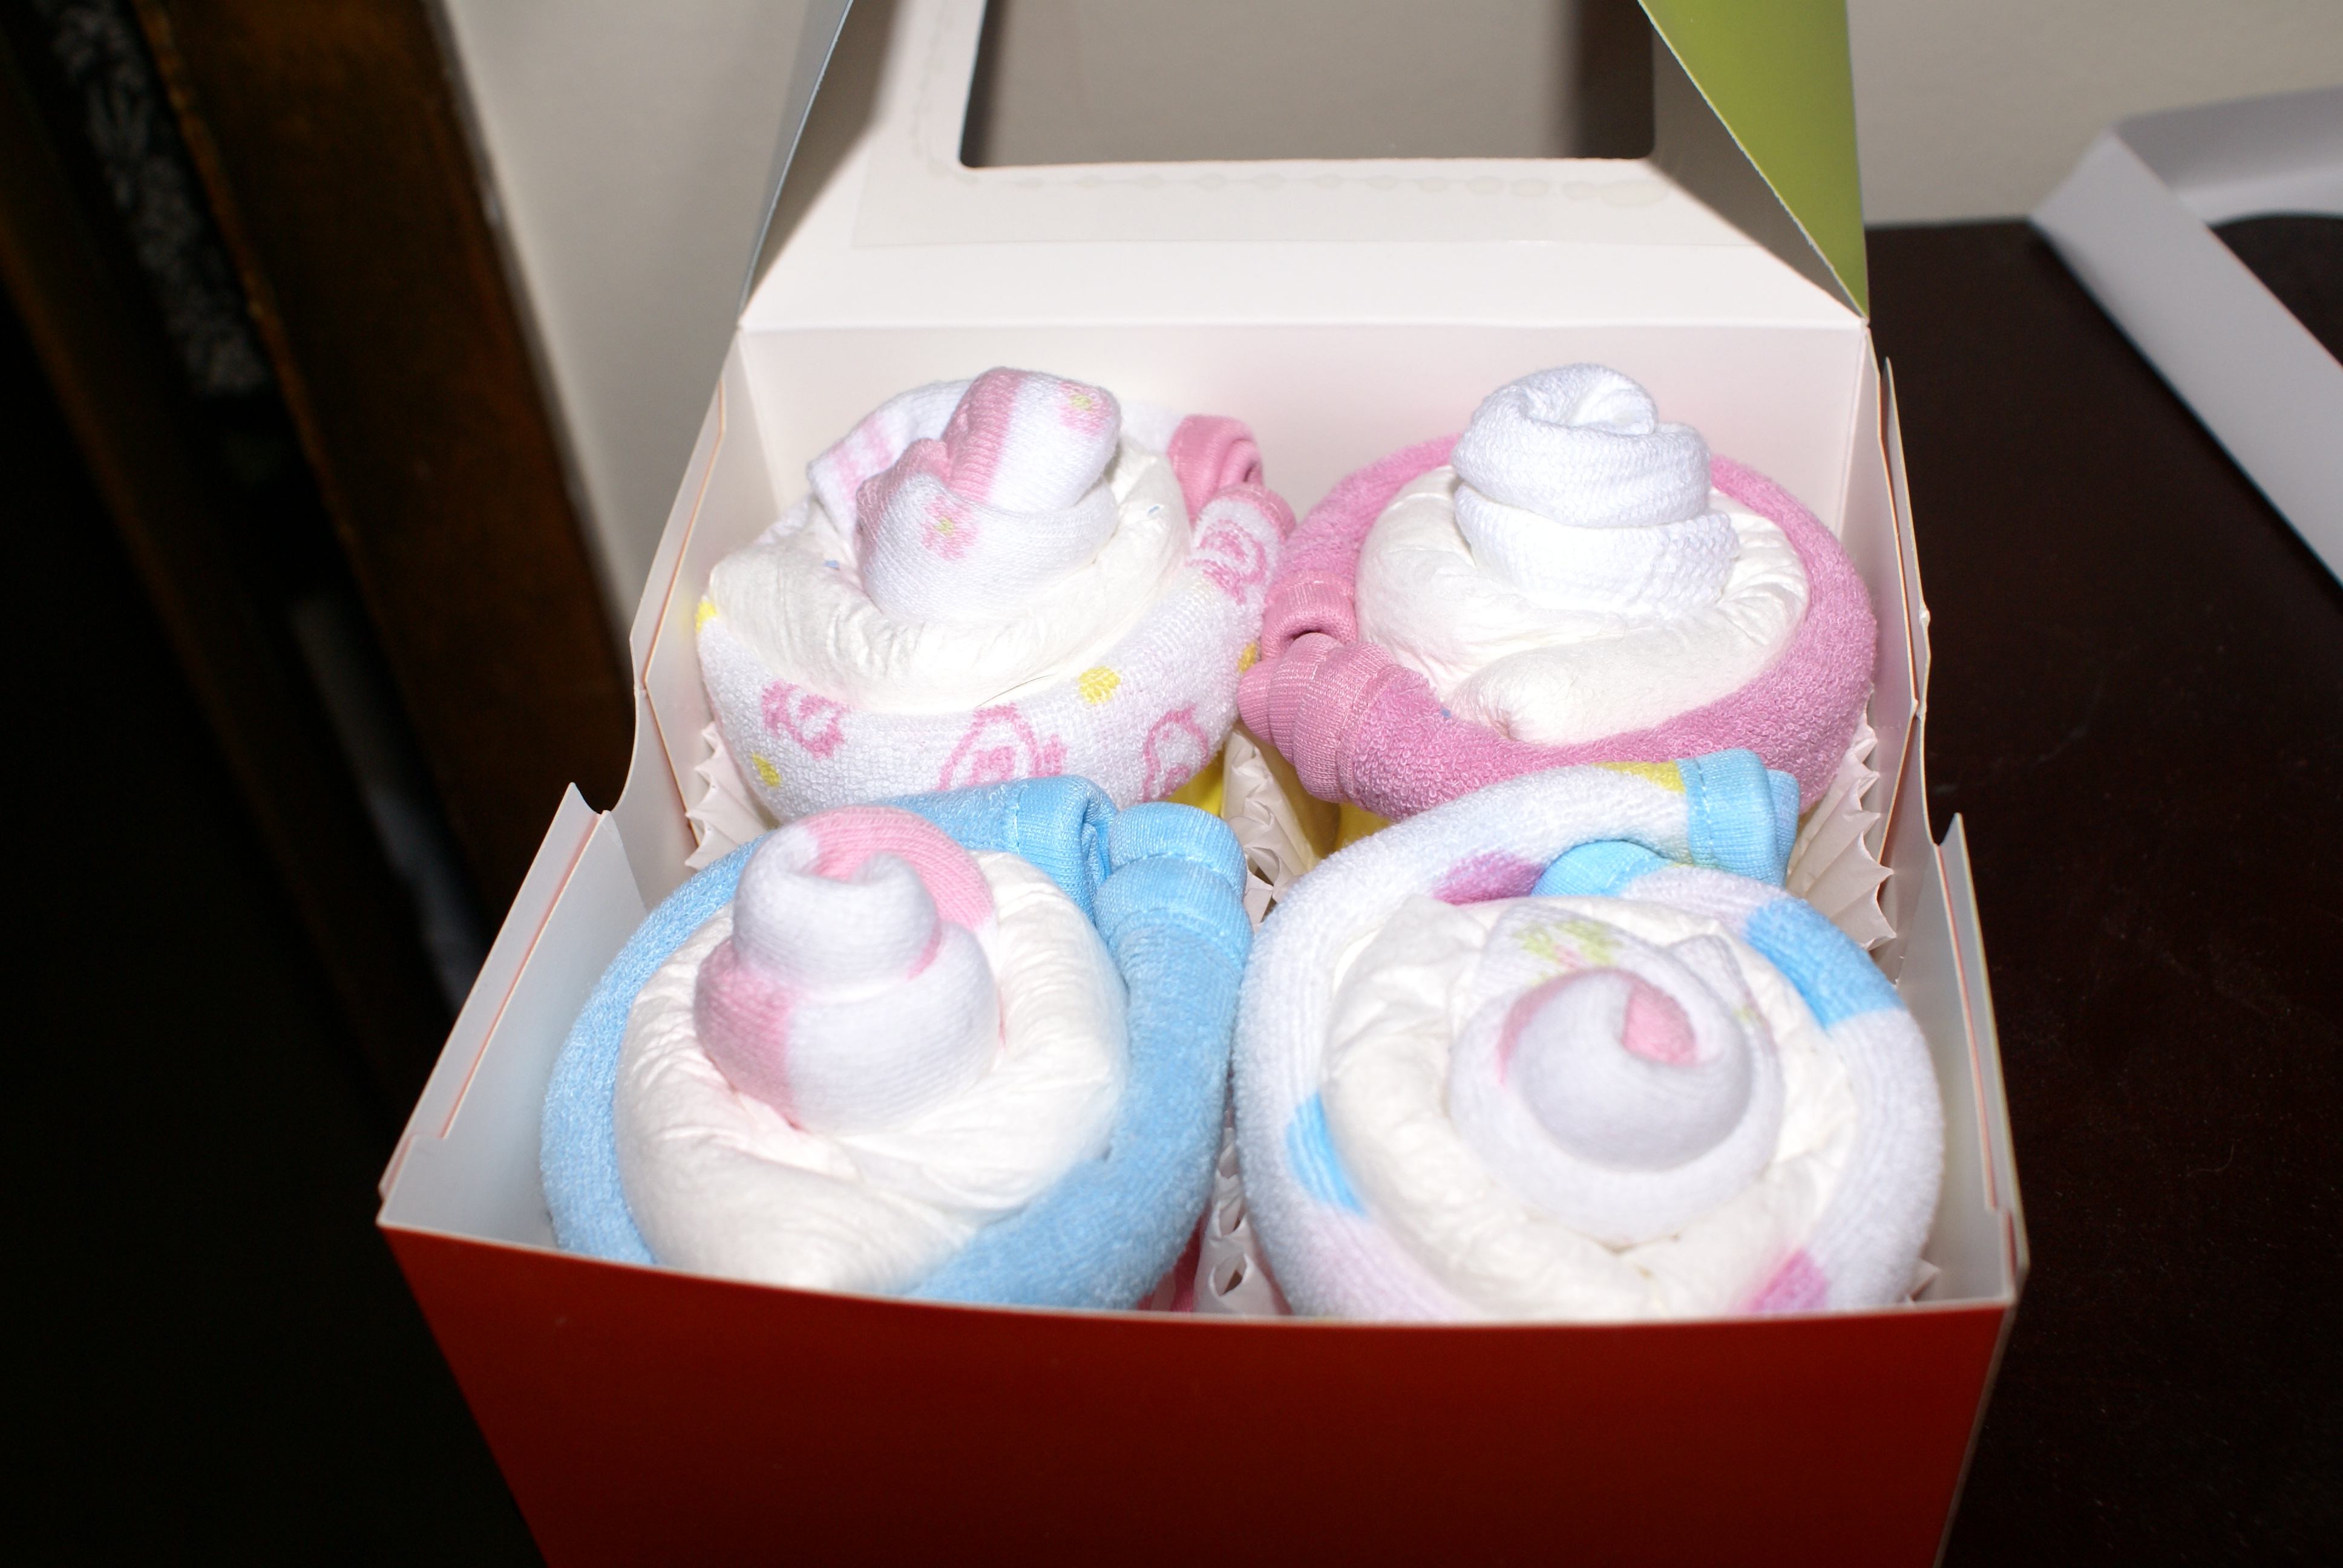 How to Make Baby Diaper Cupcakes